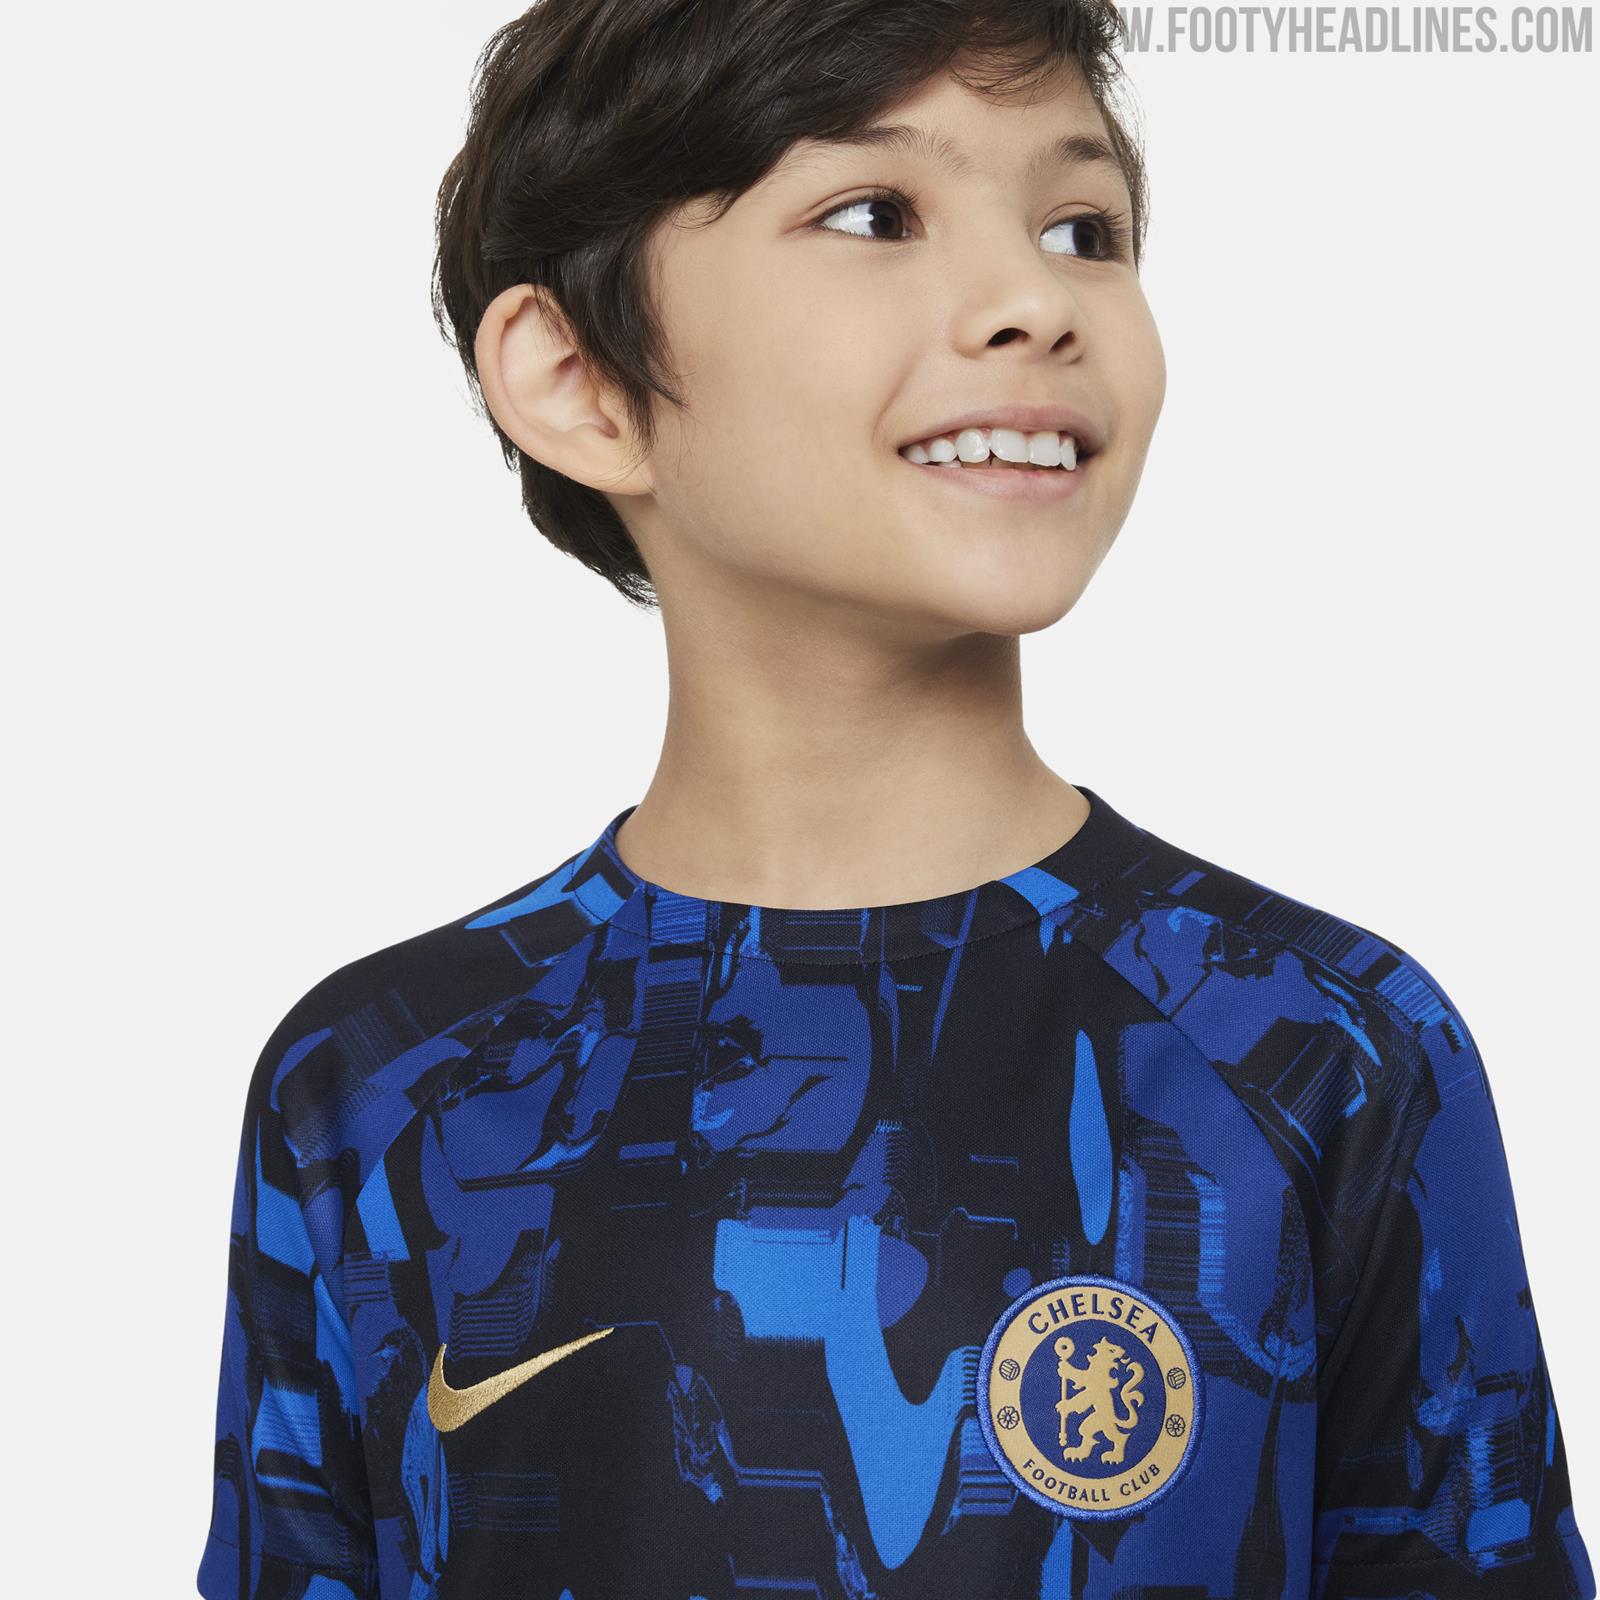 Surely Not Intended: Adidas & Nike Give Chelsea & Manchester